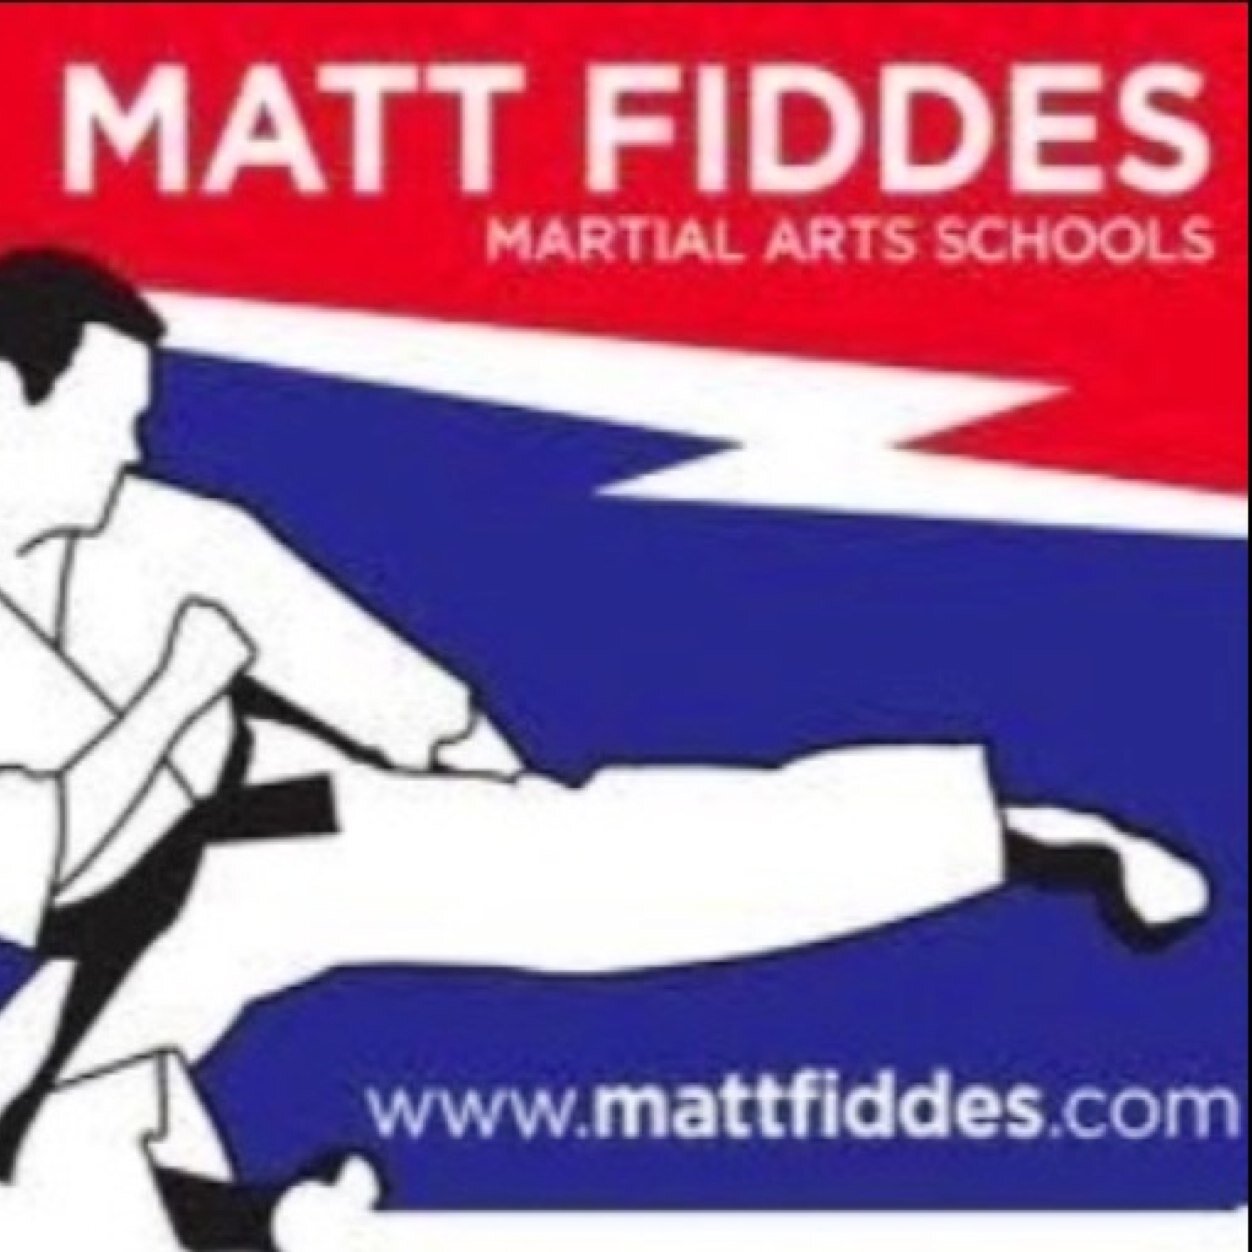 Professional Martial Arts Instructor with the Matt Fiddes group covering Somerset & Devon. Classes from 3yrs & up. Specialised Ladies only kickboxing classes.